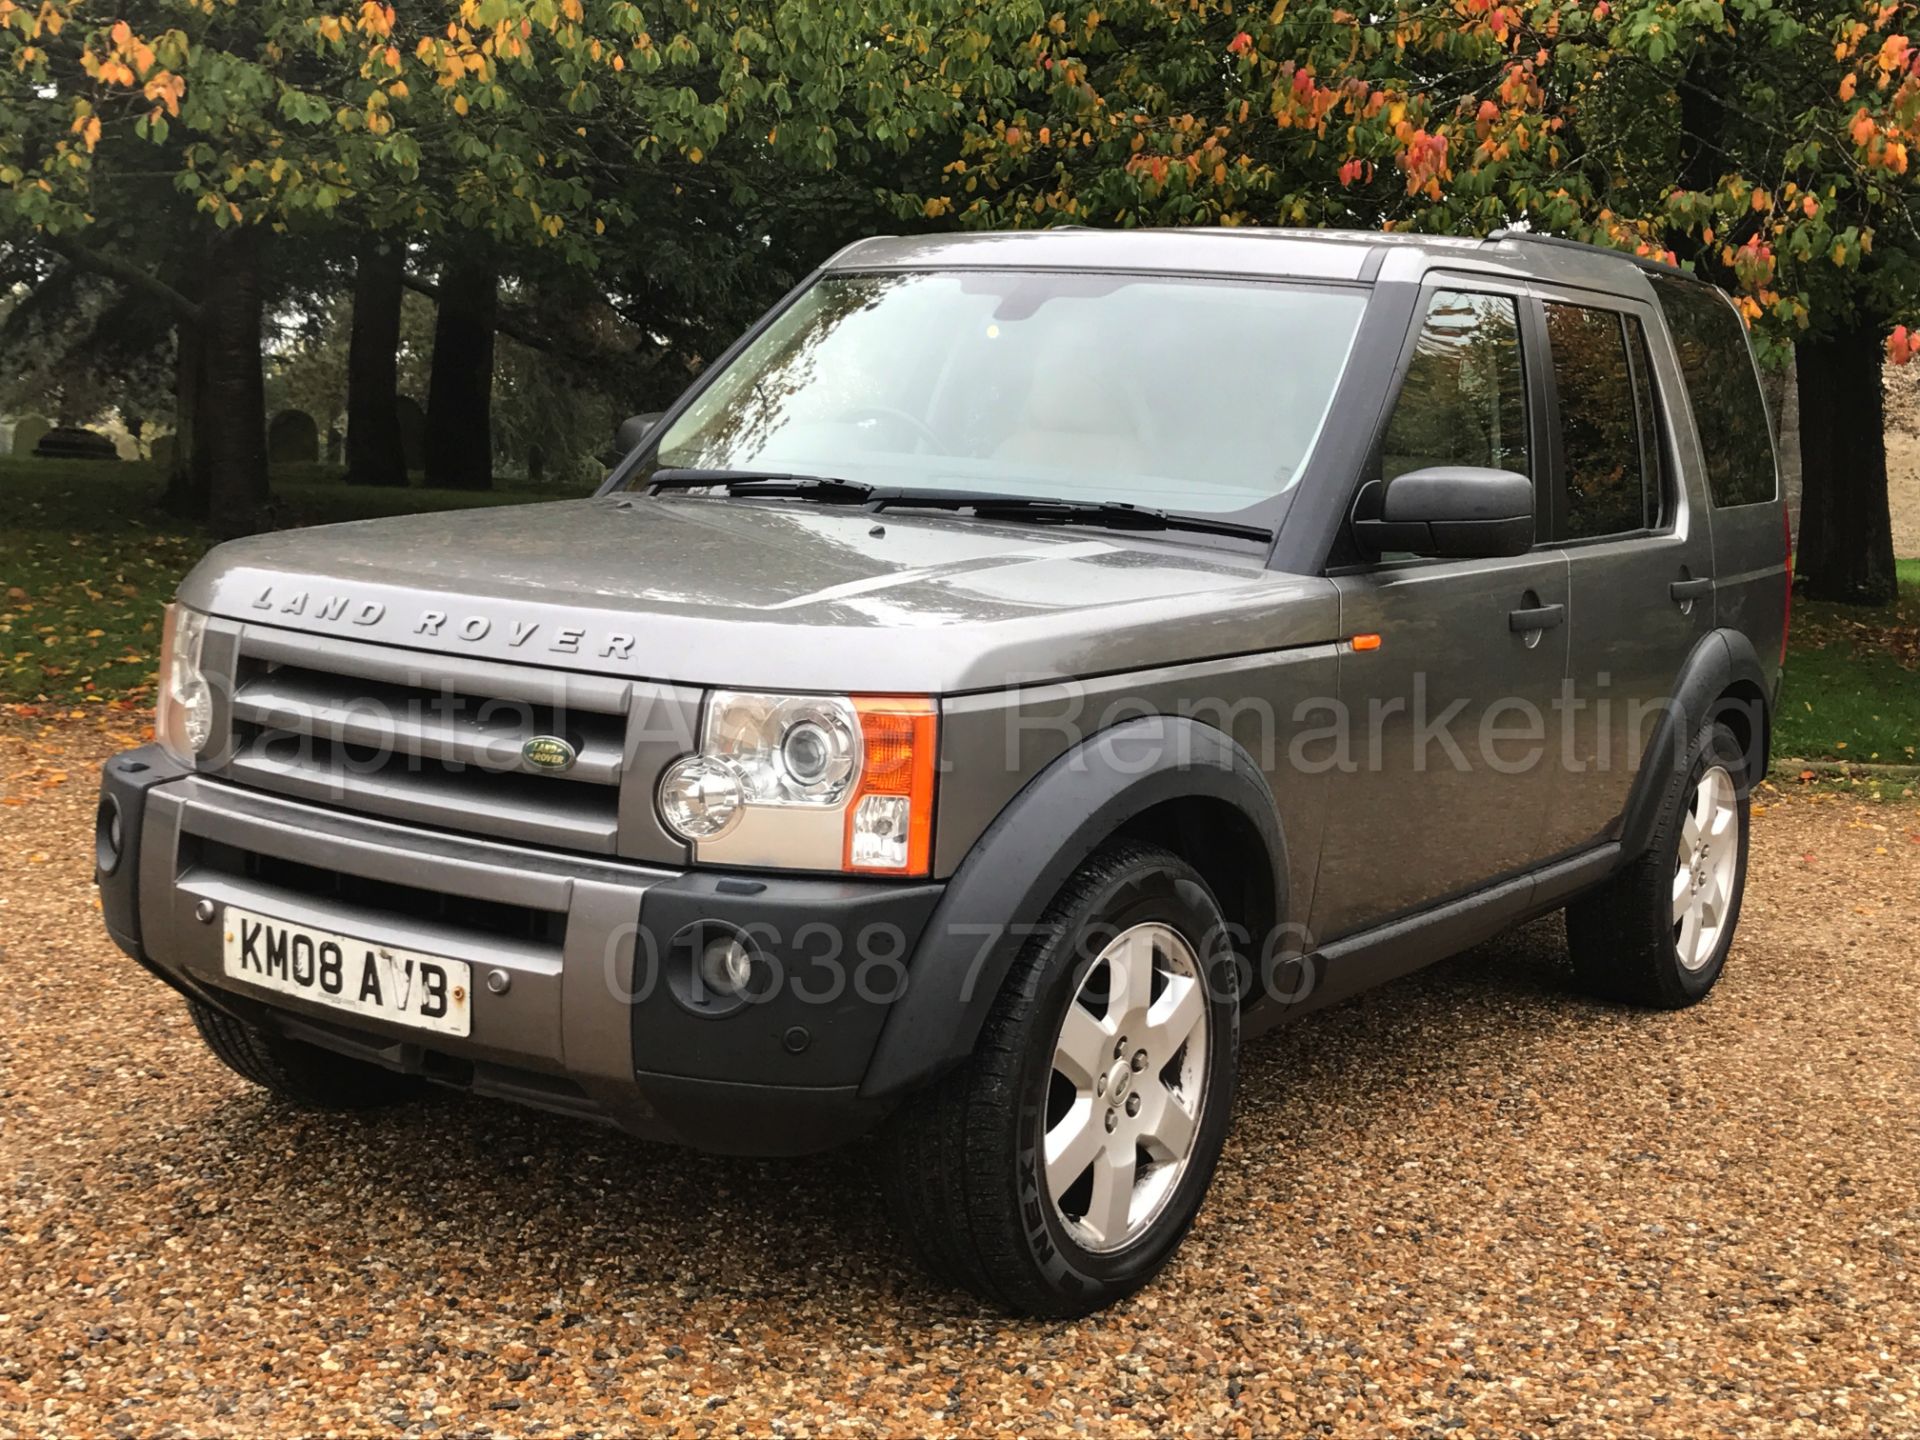 LAND ROVER DISCOVERY 3 HSE (2008 - 08 REG) 'TDV6 - AUTO - LEATHER - SAT NAV - 7 SEATER' *1 OWNER* - Image 4 of 37